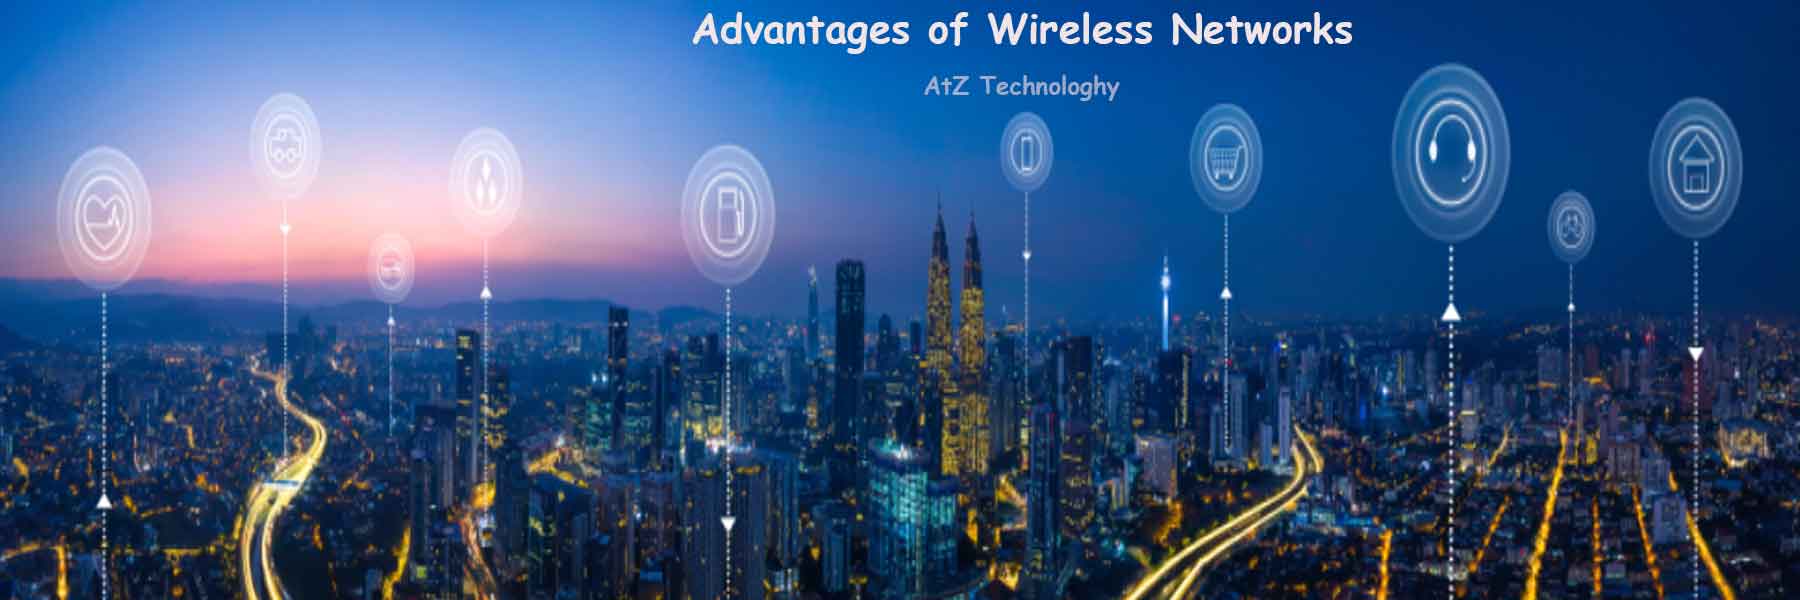 Advantages of Wireless Networks